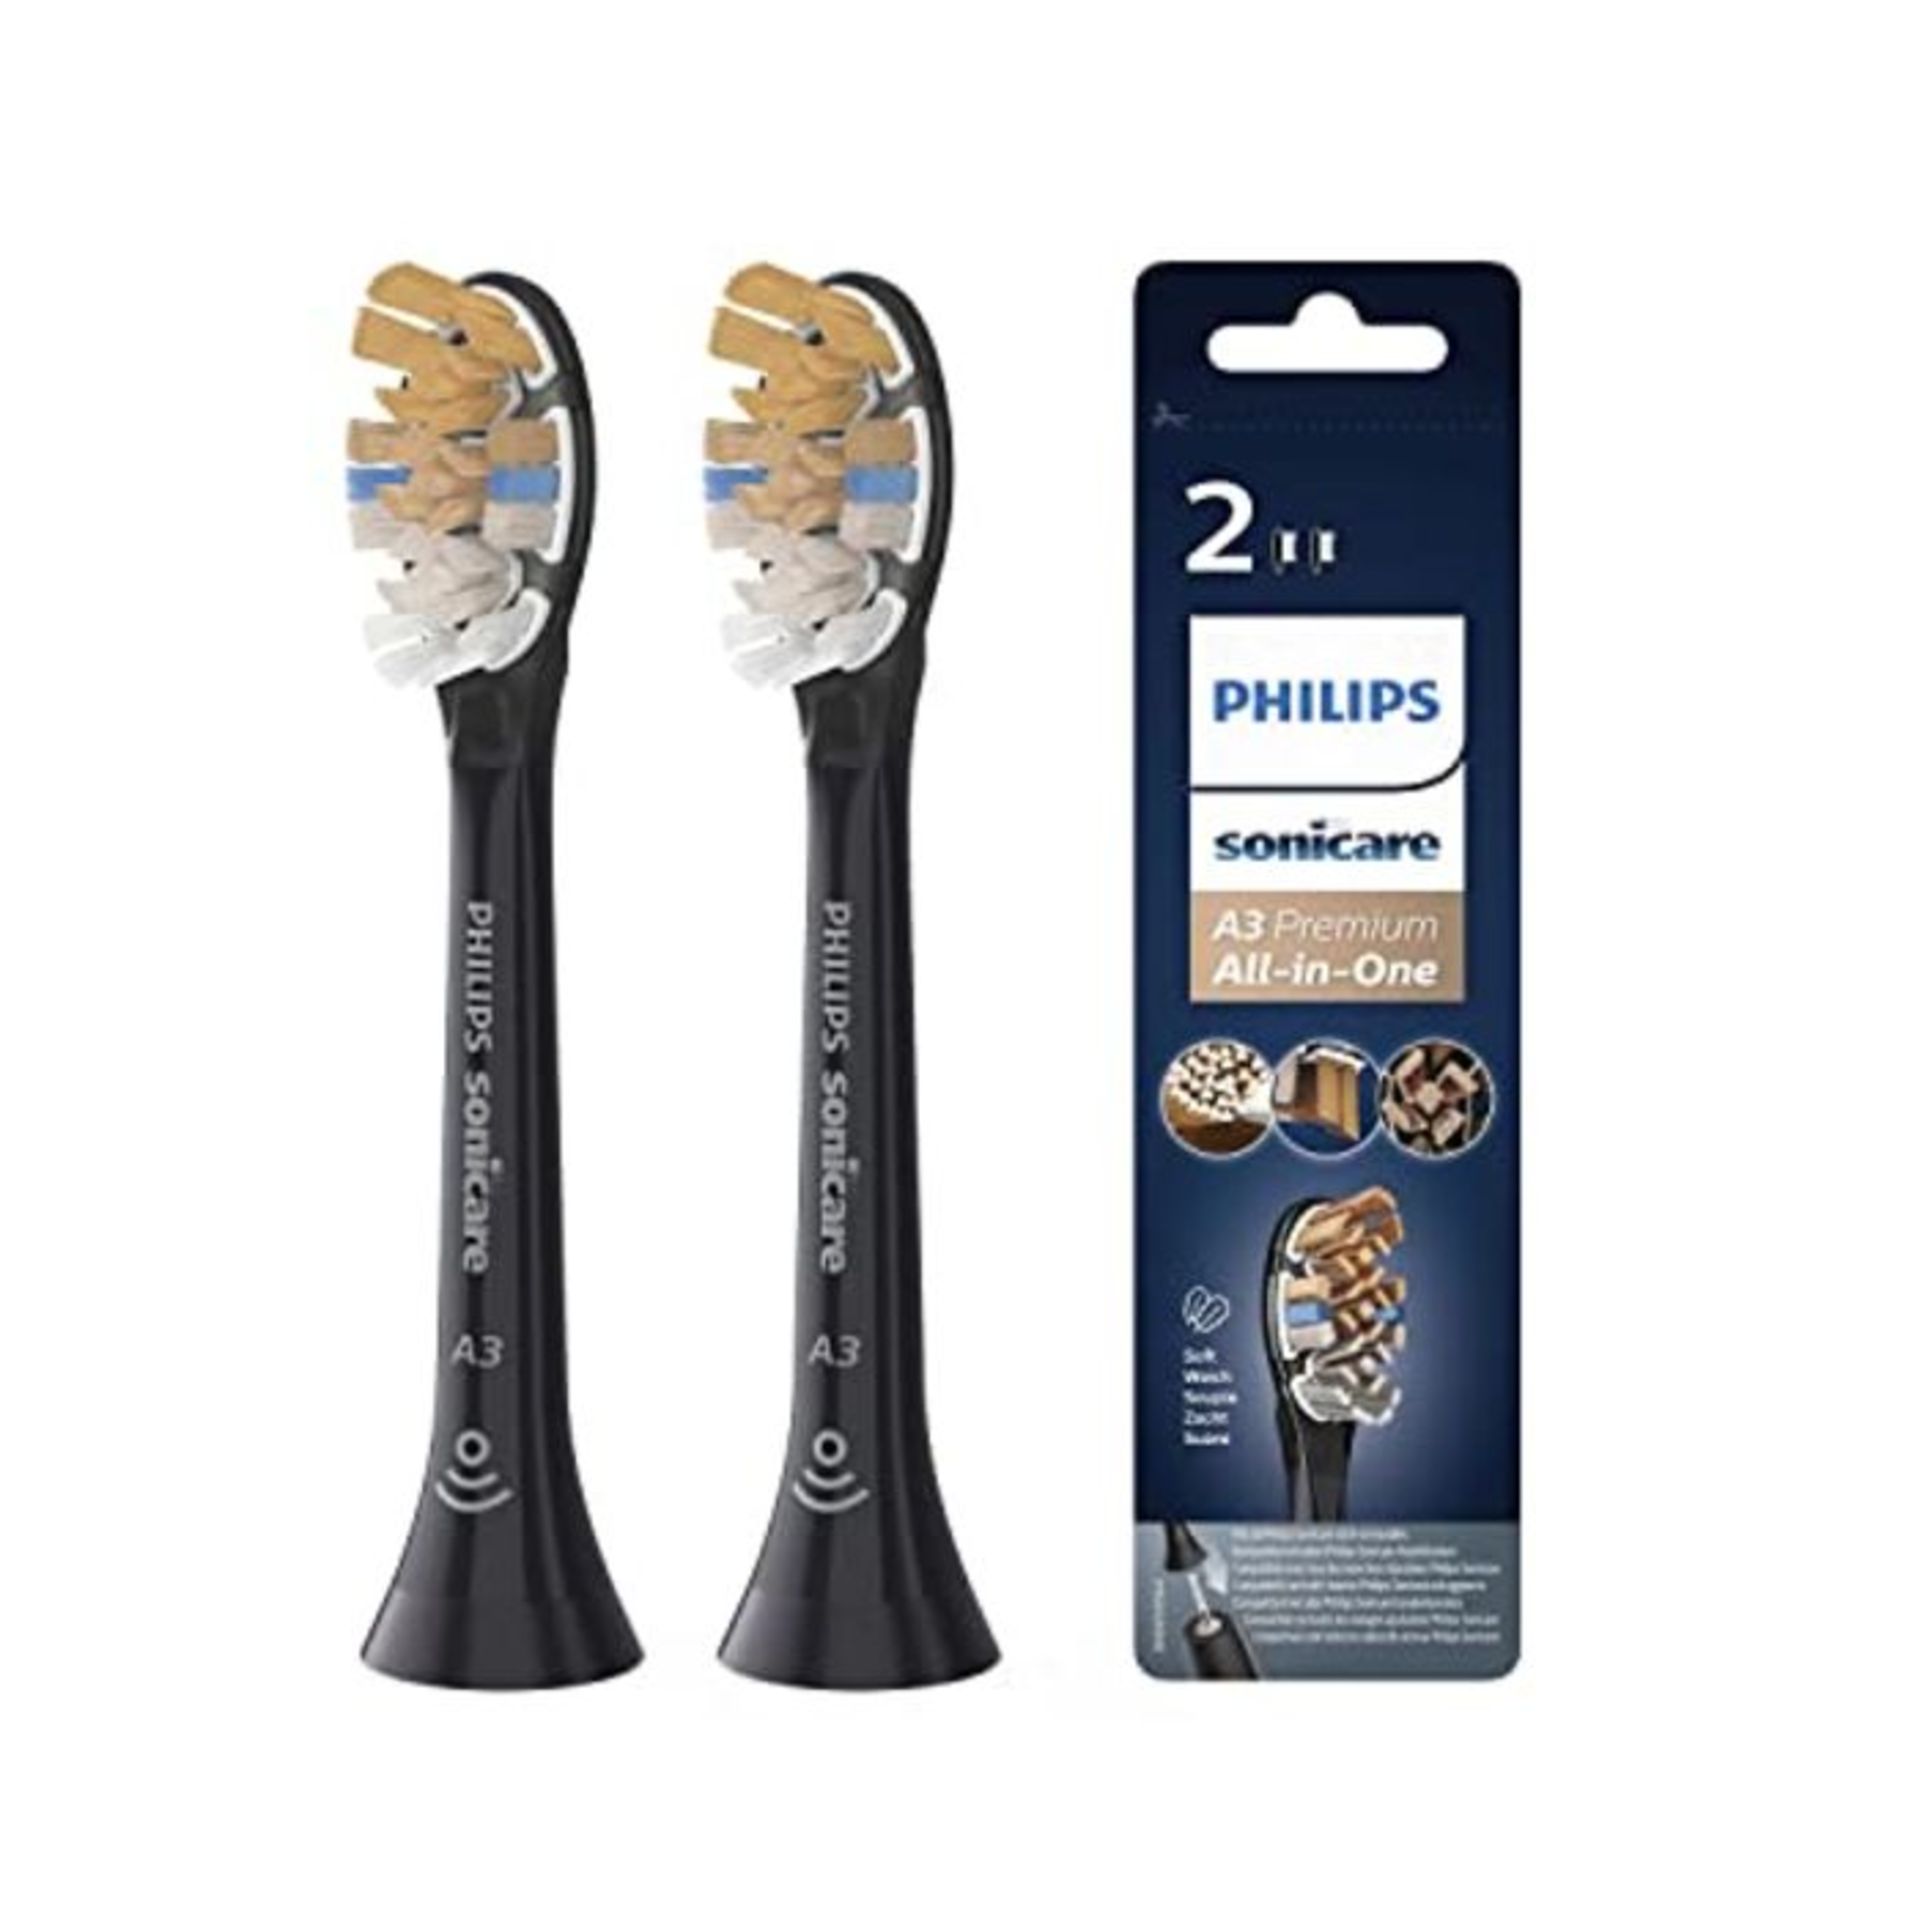 Philips Sonicare Genuine Sonicare A3 Premium All-in-One Brush Head for Complete Care,